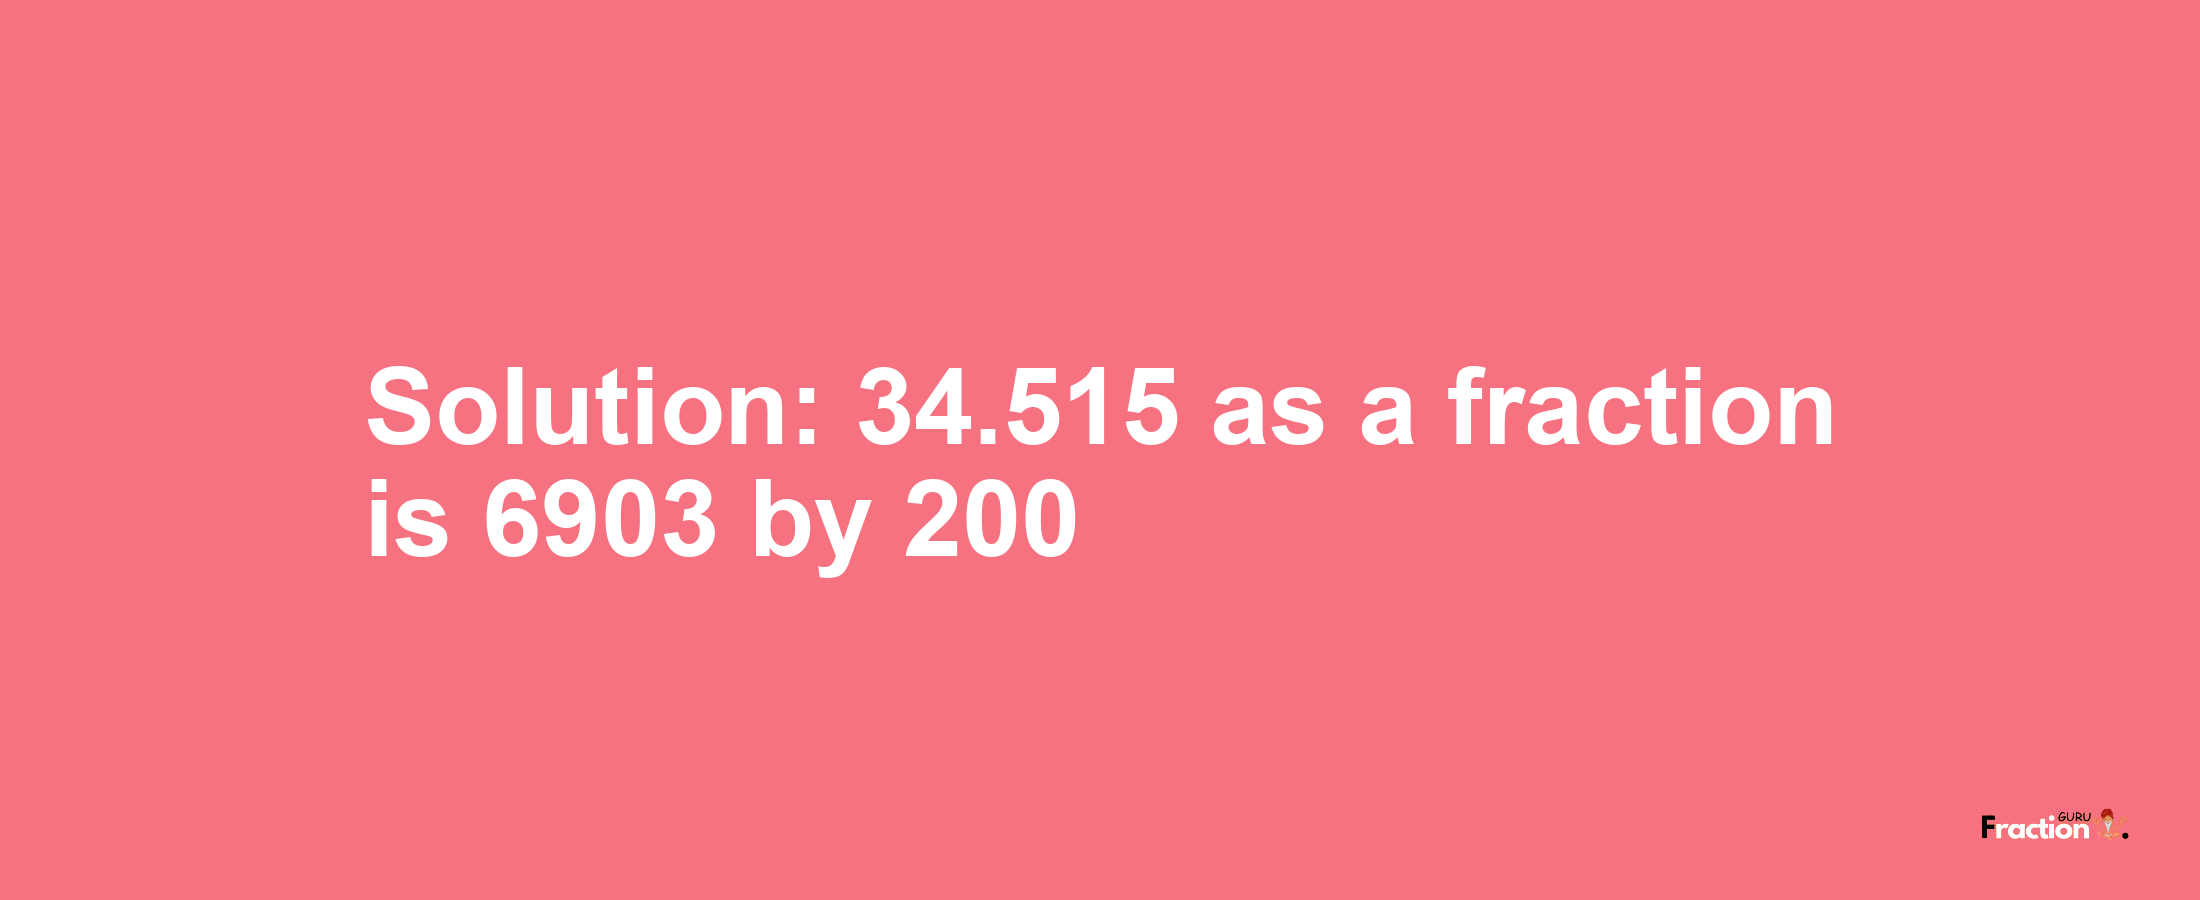 Solution:34.515 as a fraction is 6903/200